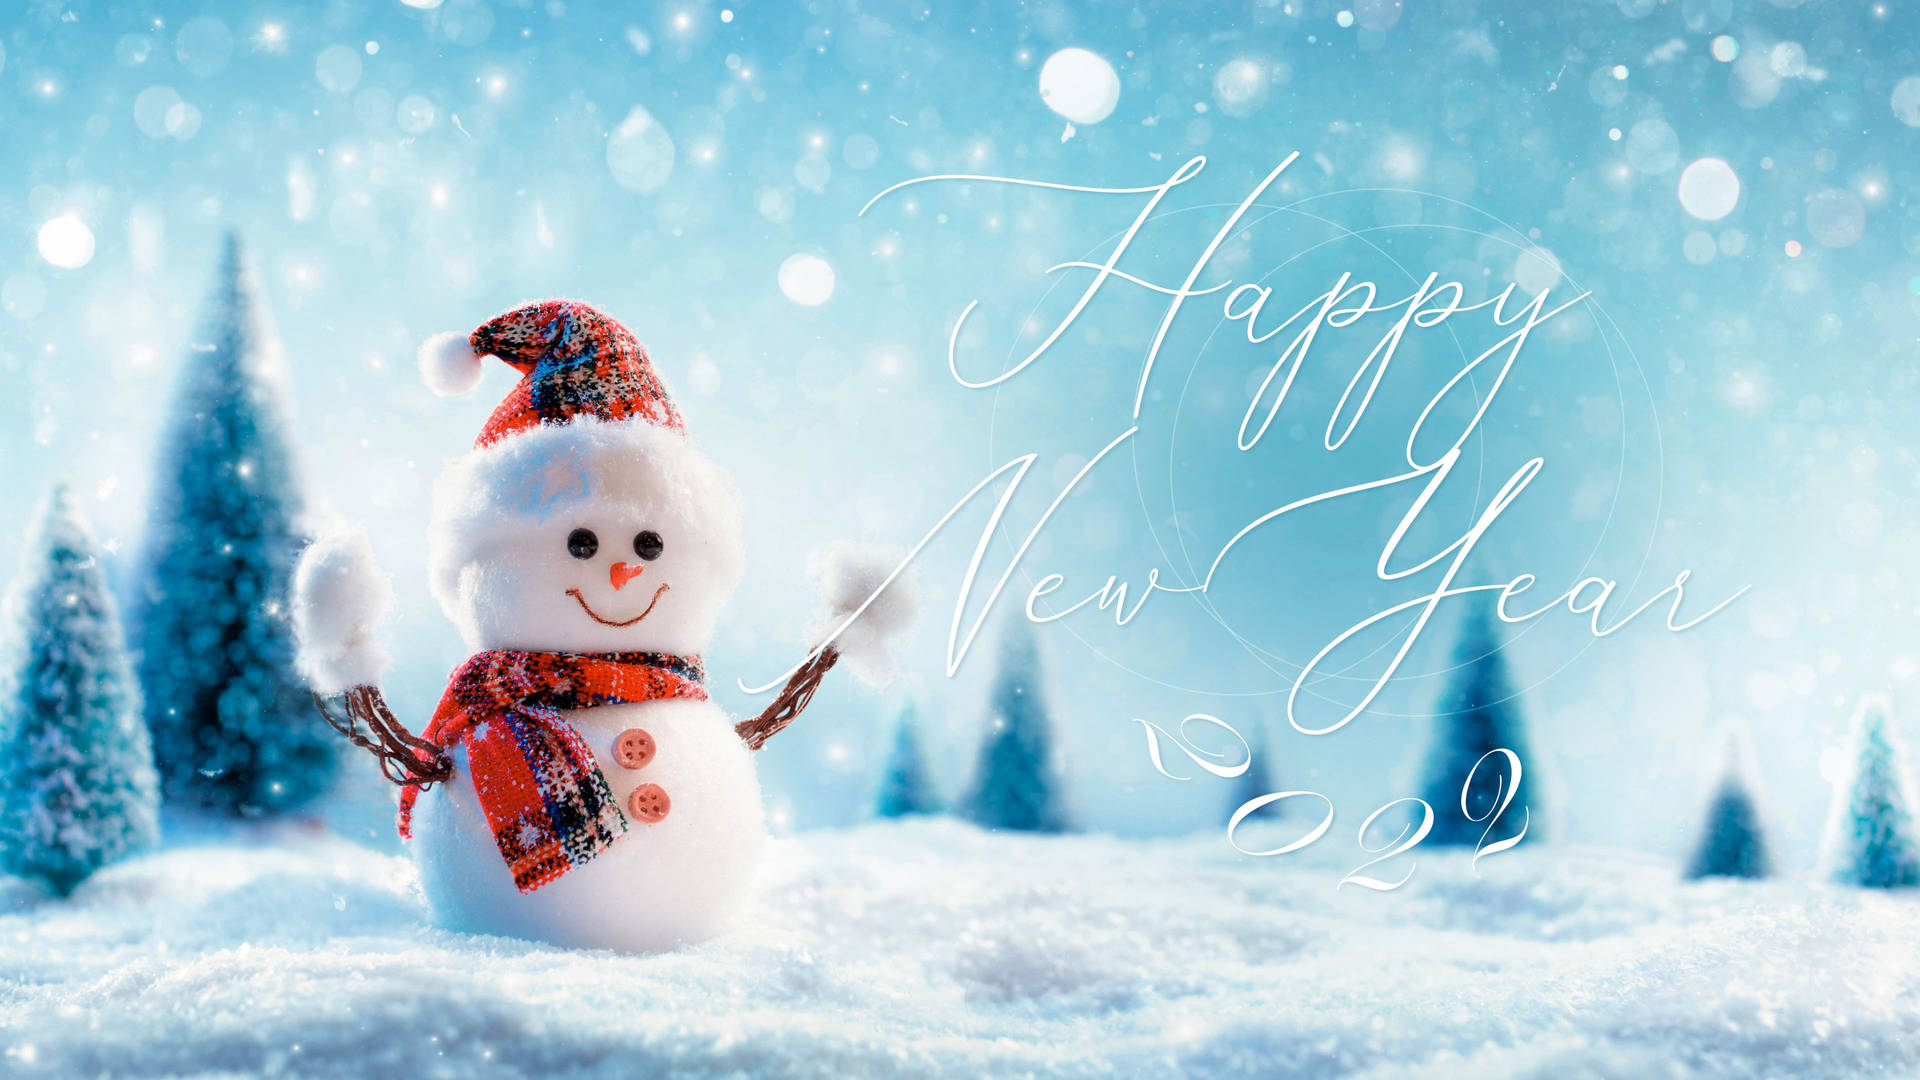 Welcome 2022! Celebrate The Year With Joy And Cheer | Happy New Year 2022 Celebration Image Wallpaper